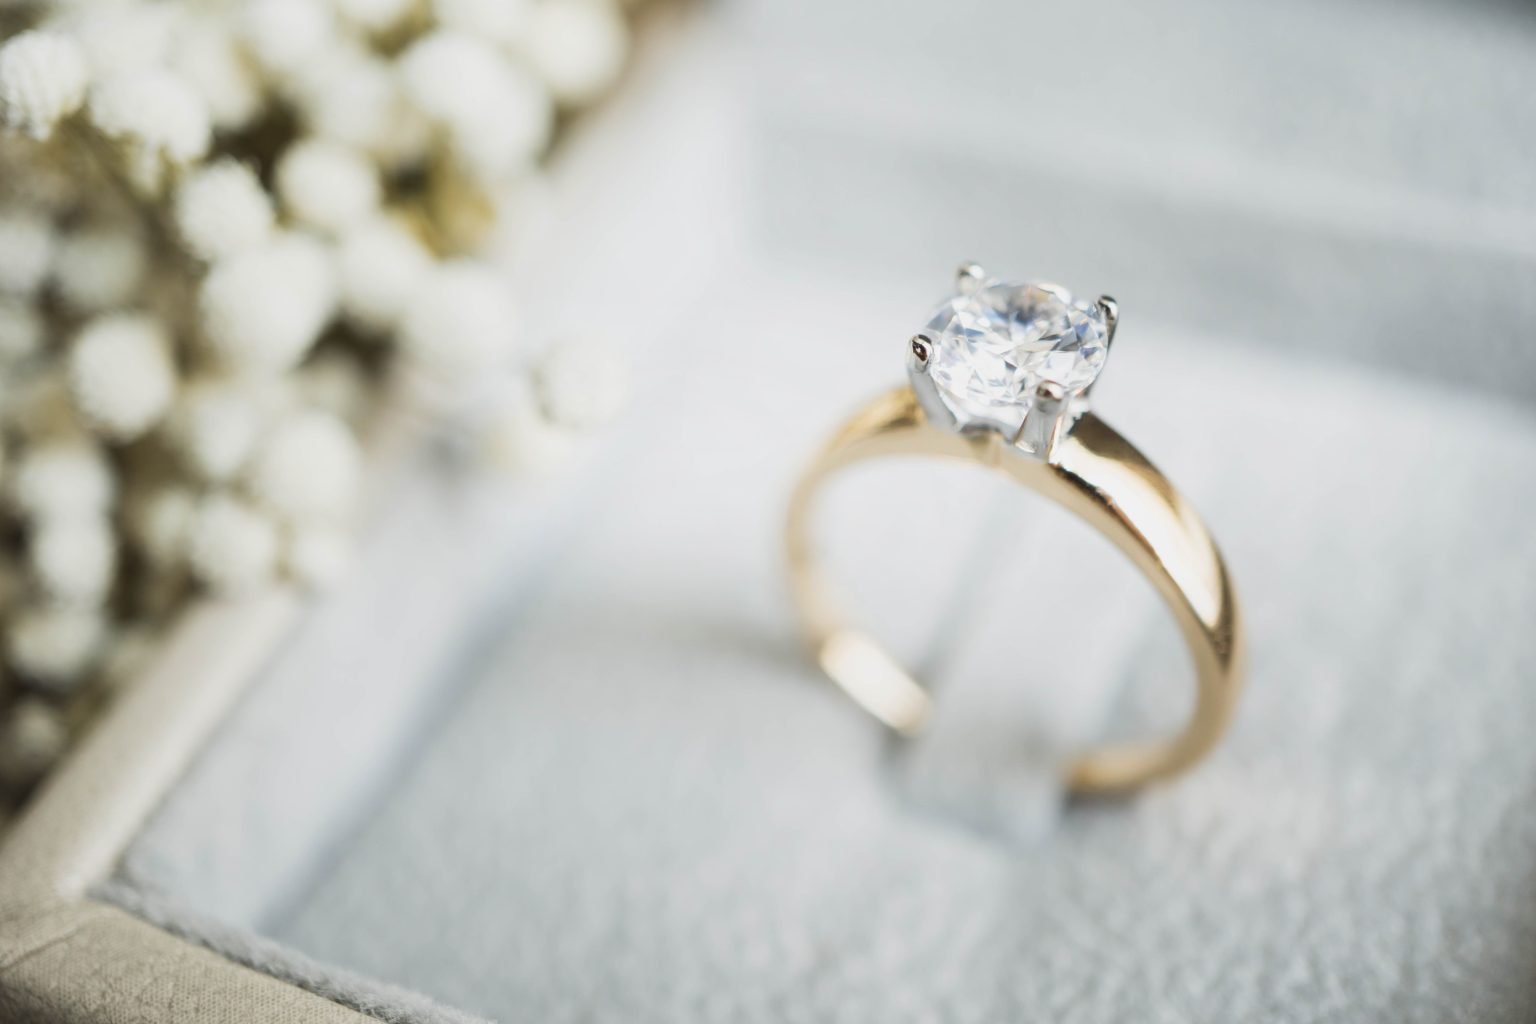 Most Popular Engagement Ring Styles For 2022 - Wedding Journal